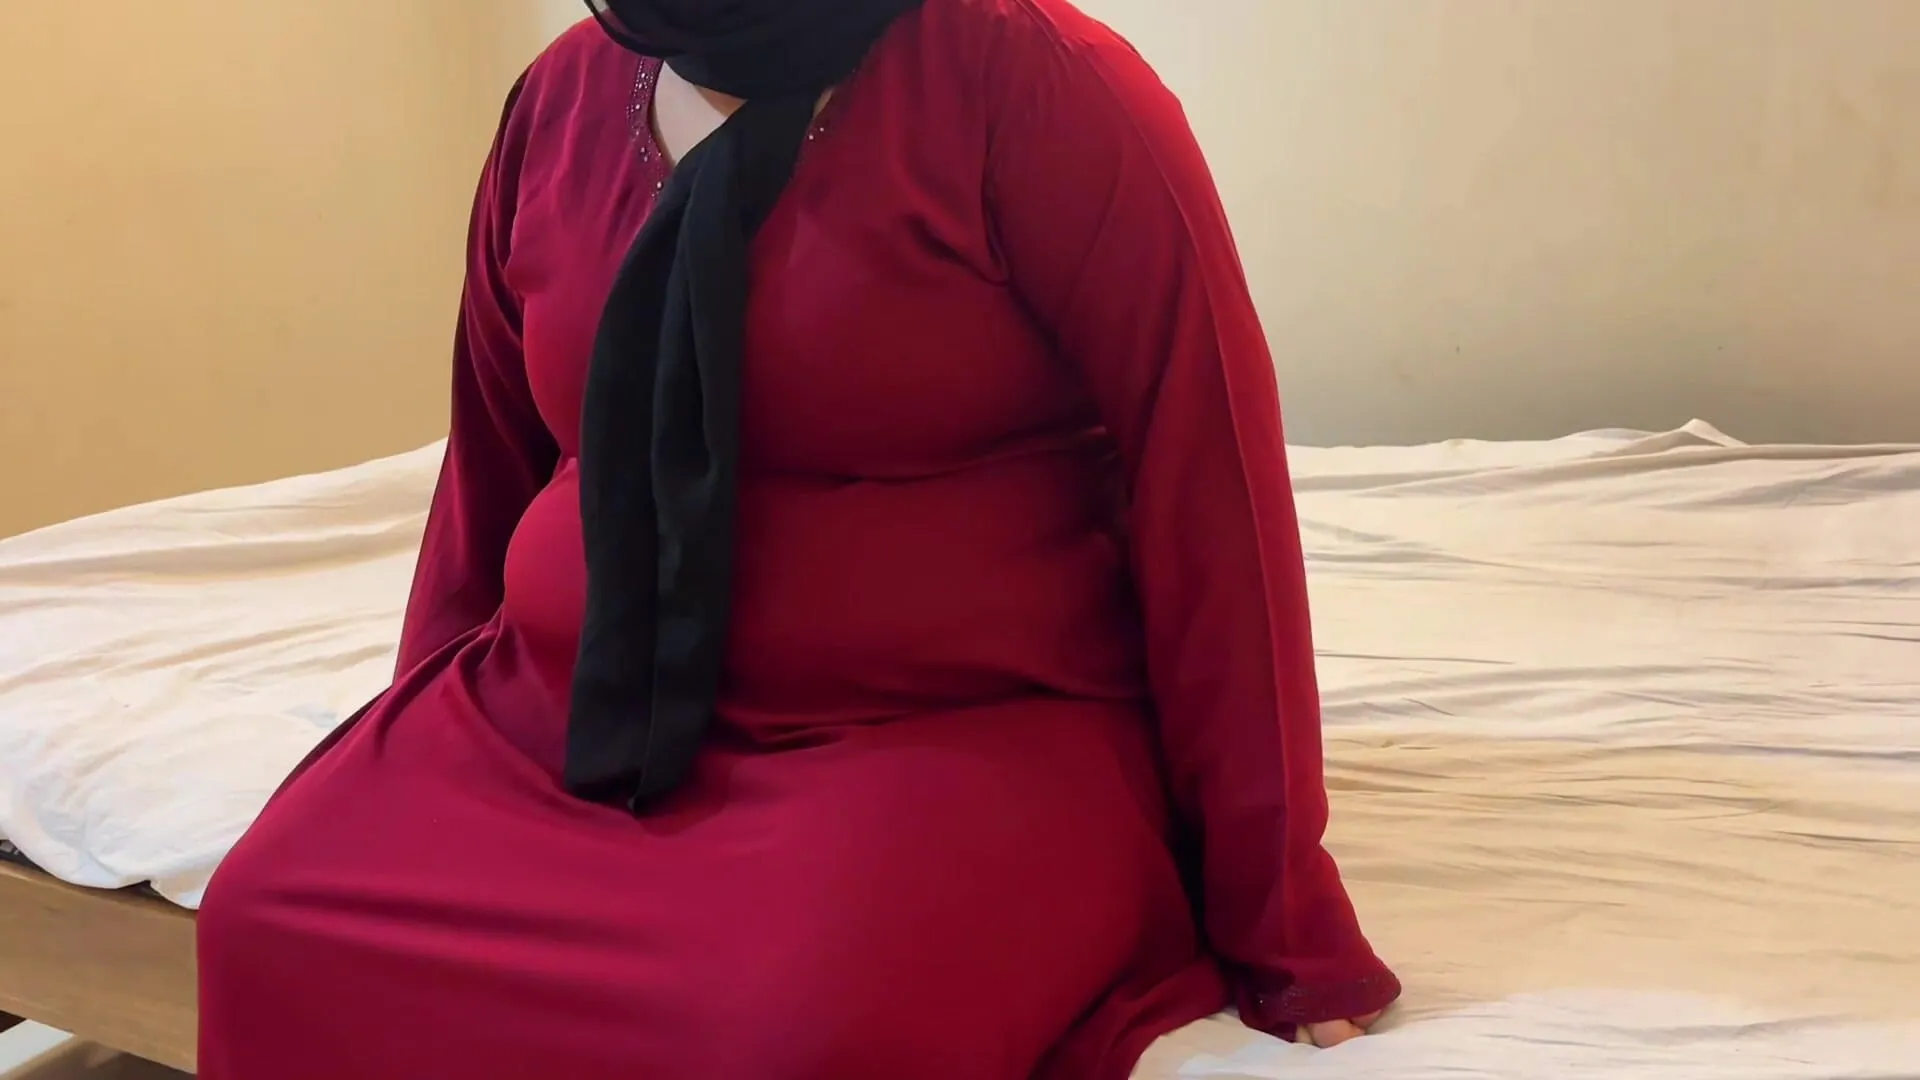 Saudi Arabian Mum Fucked By Son In The Kitchen - Fucking a Chubby Muslim Mother-in-law Wearing a Red Burqa & Hijab de Aria  Mia | FapHouse